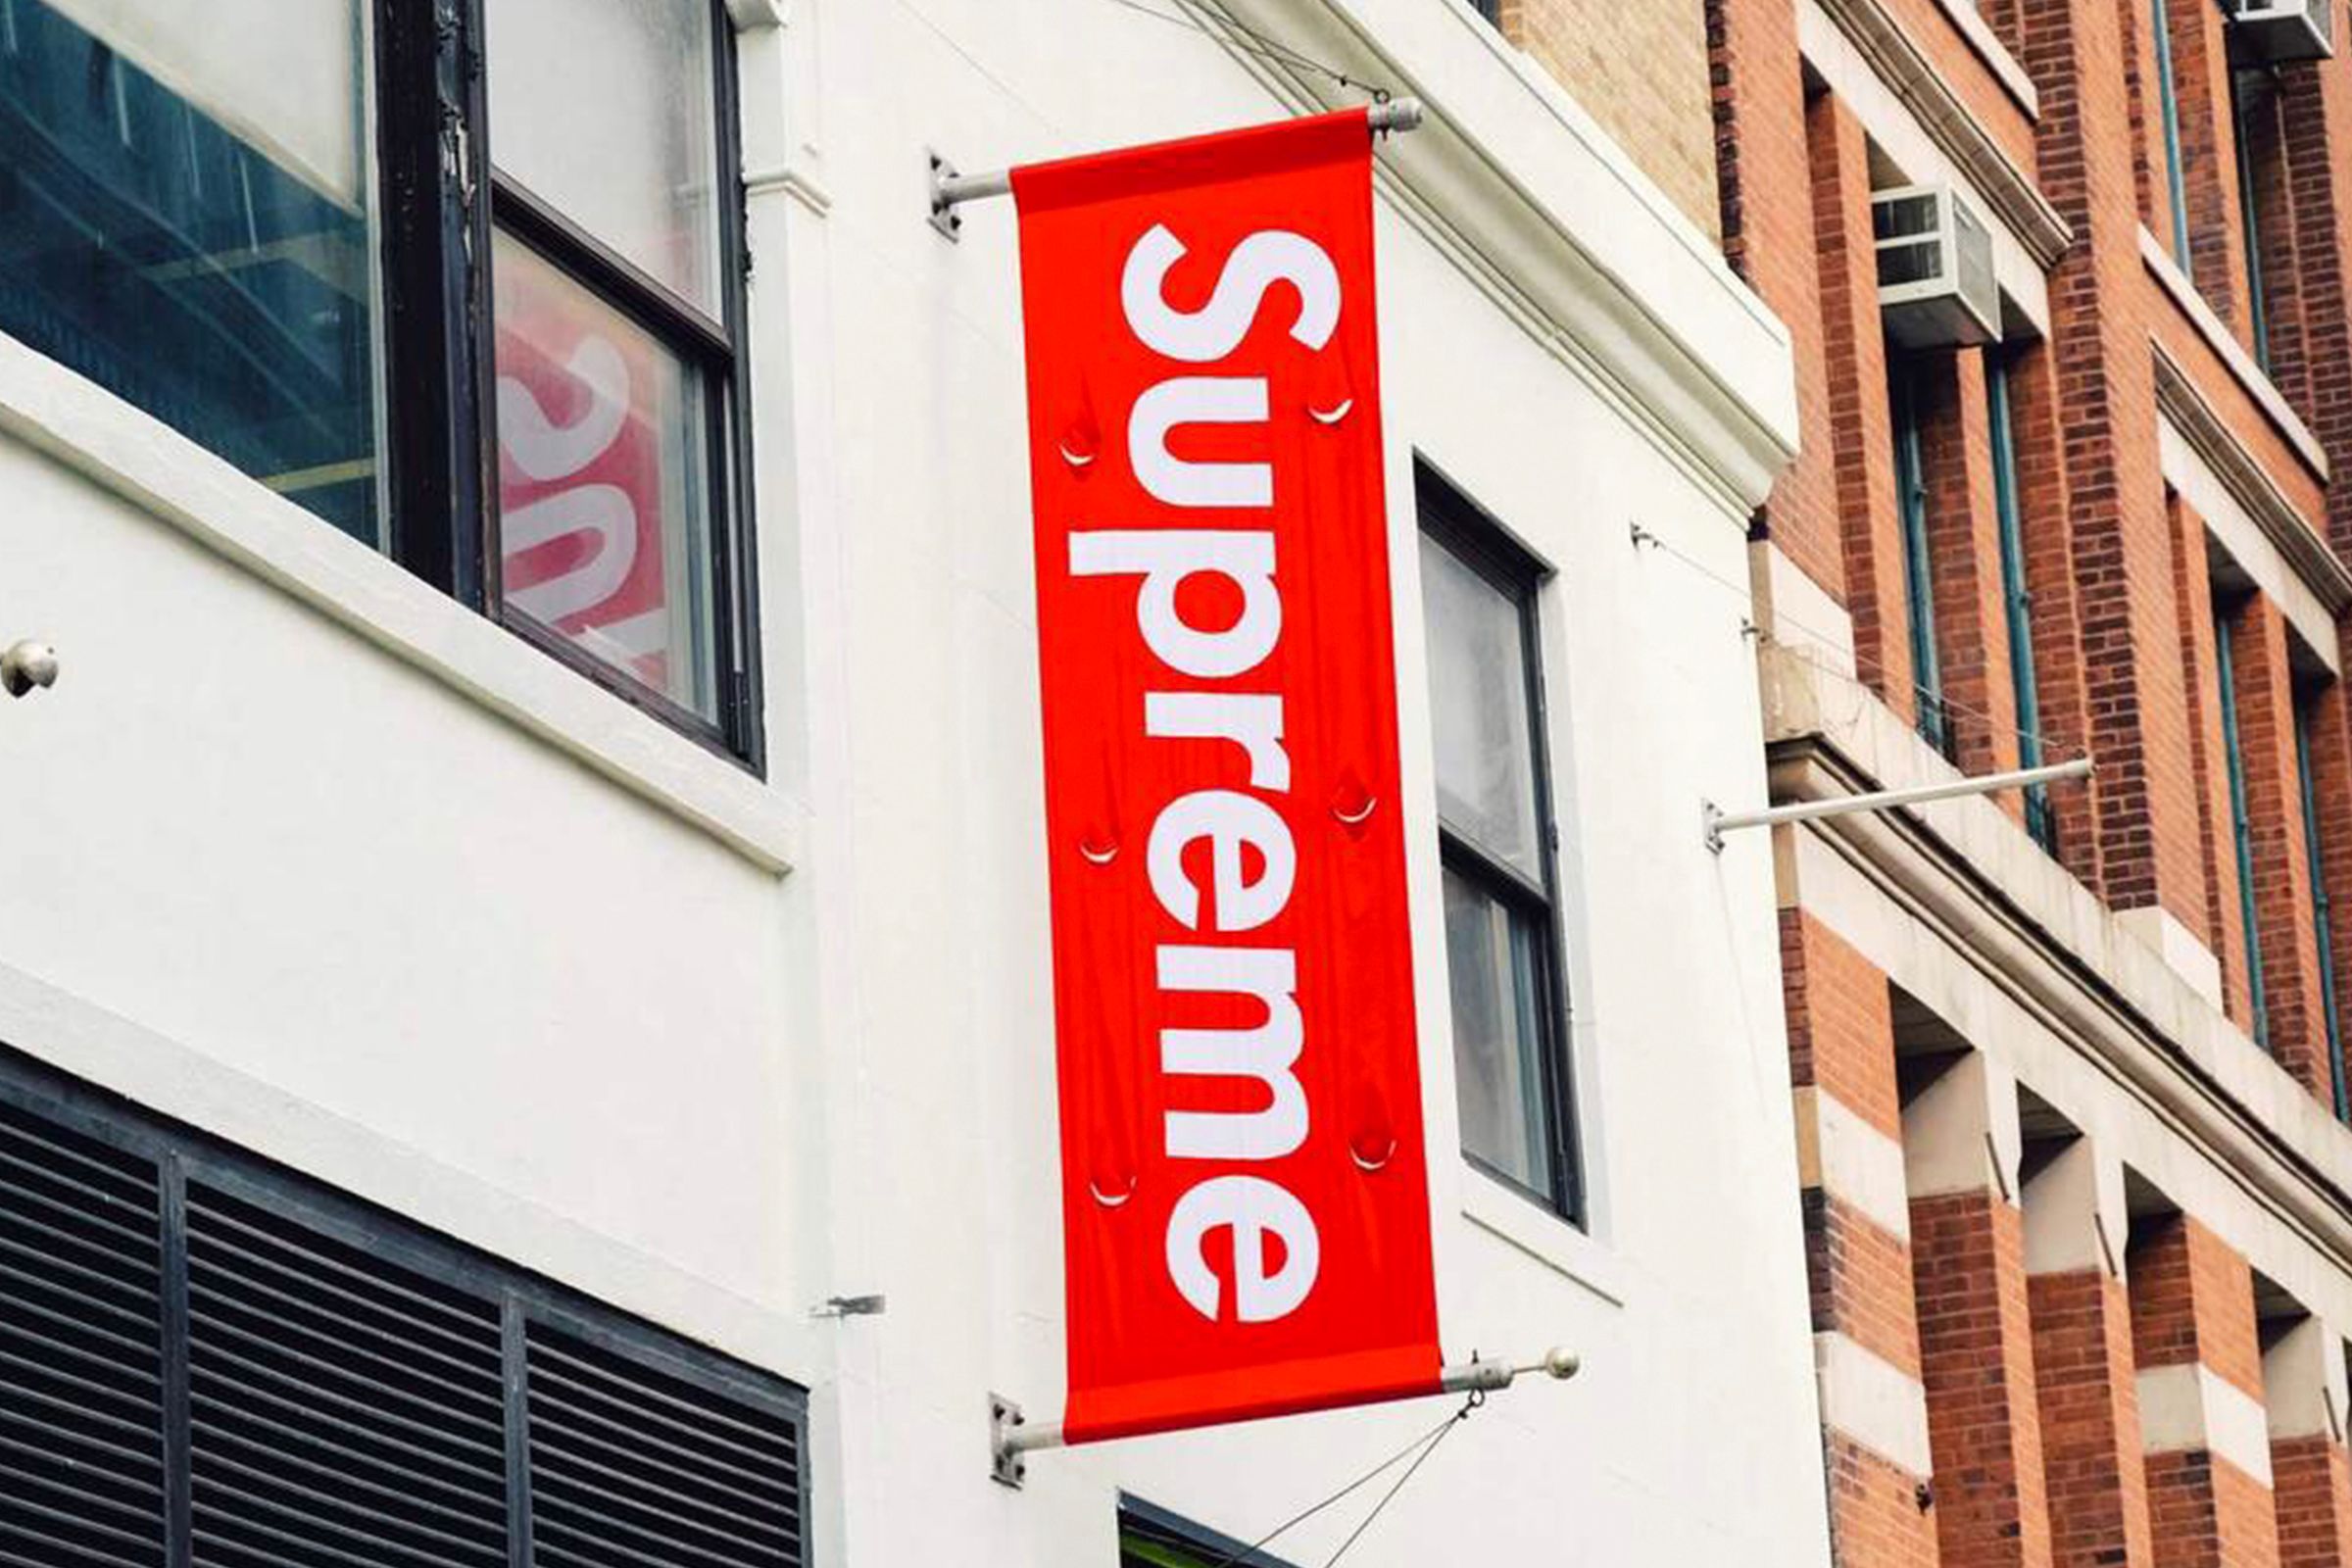 Most Expensive Supreme Products for Sale Right Now